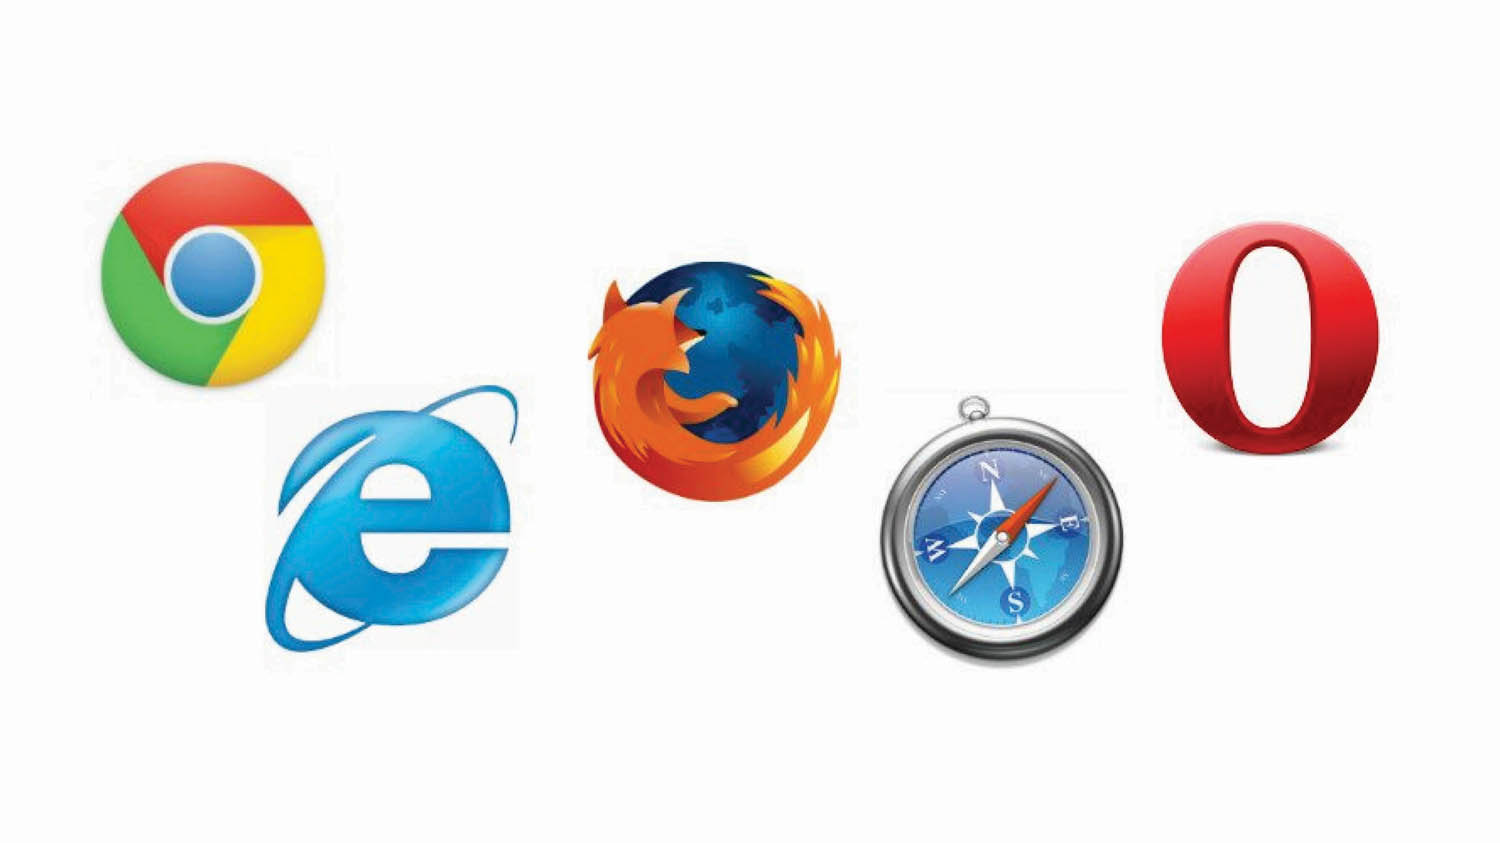 Cross Browser Testing: Manual vs Automated